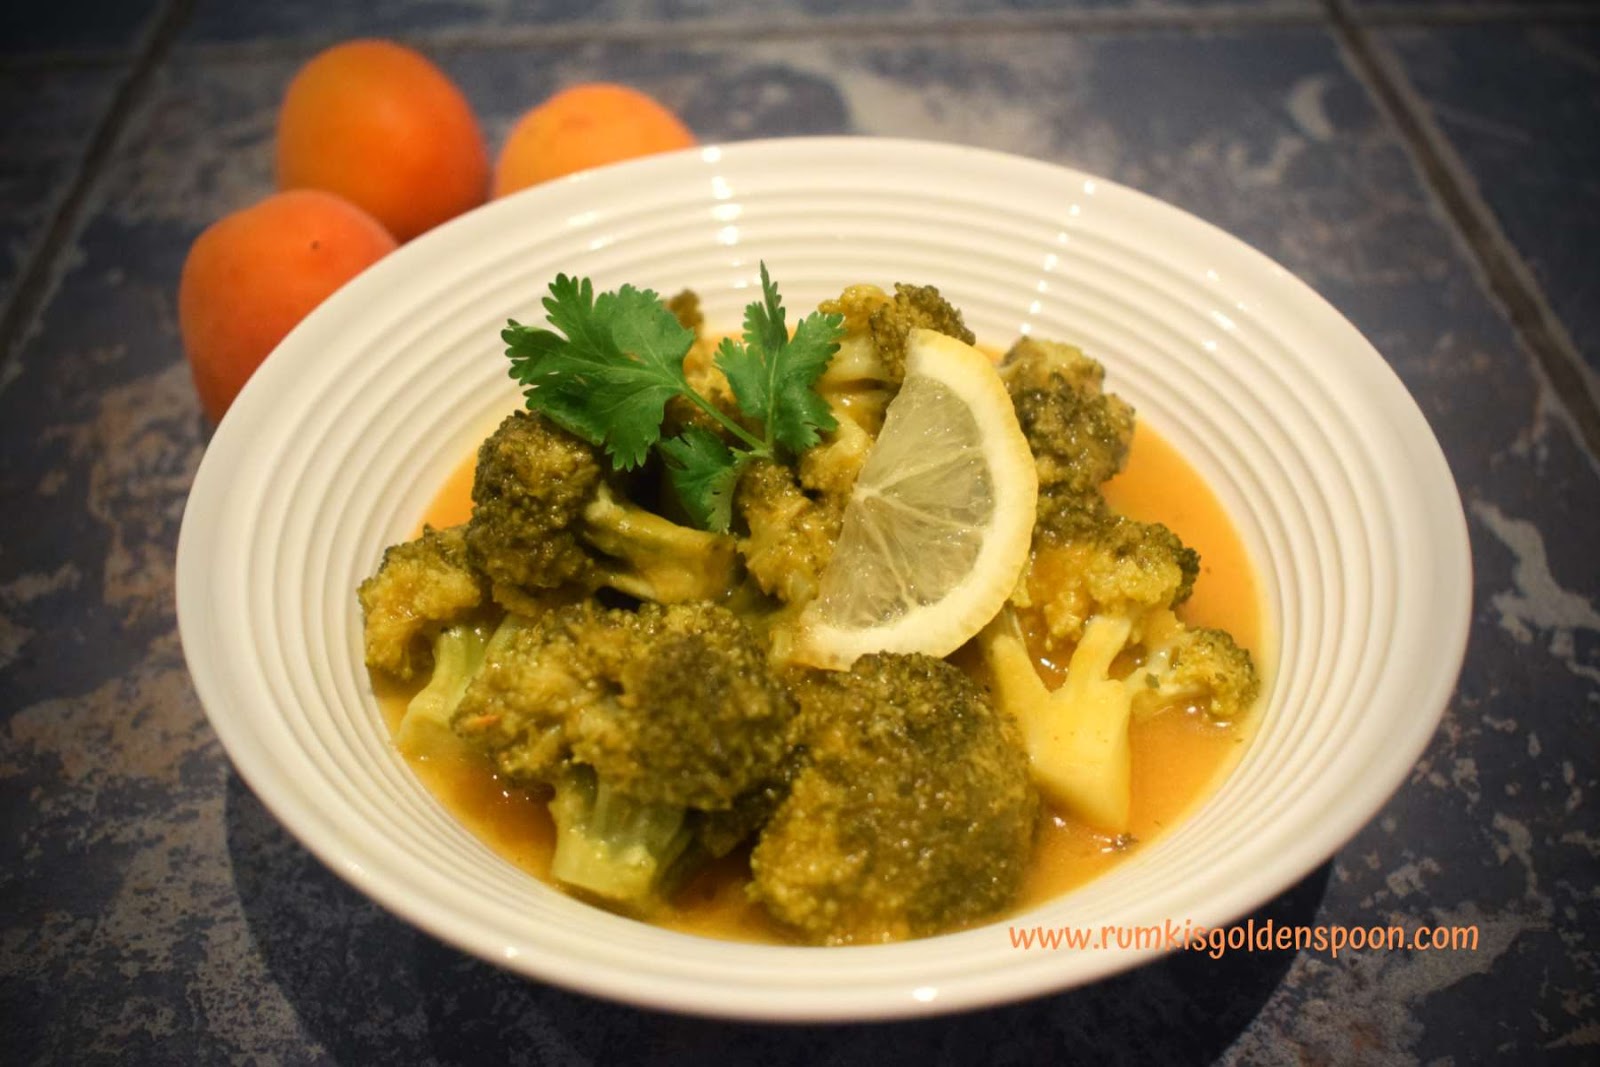 Broccoli with Apricot & English Mustard, Vegetarian Recipe, Vegan, Quick and Easy, Rumki's Golden Spoon, Healthy recipe, recipe with vegetables